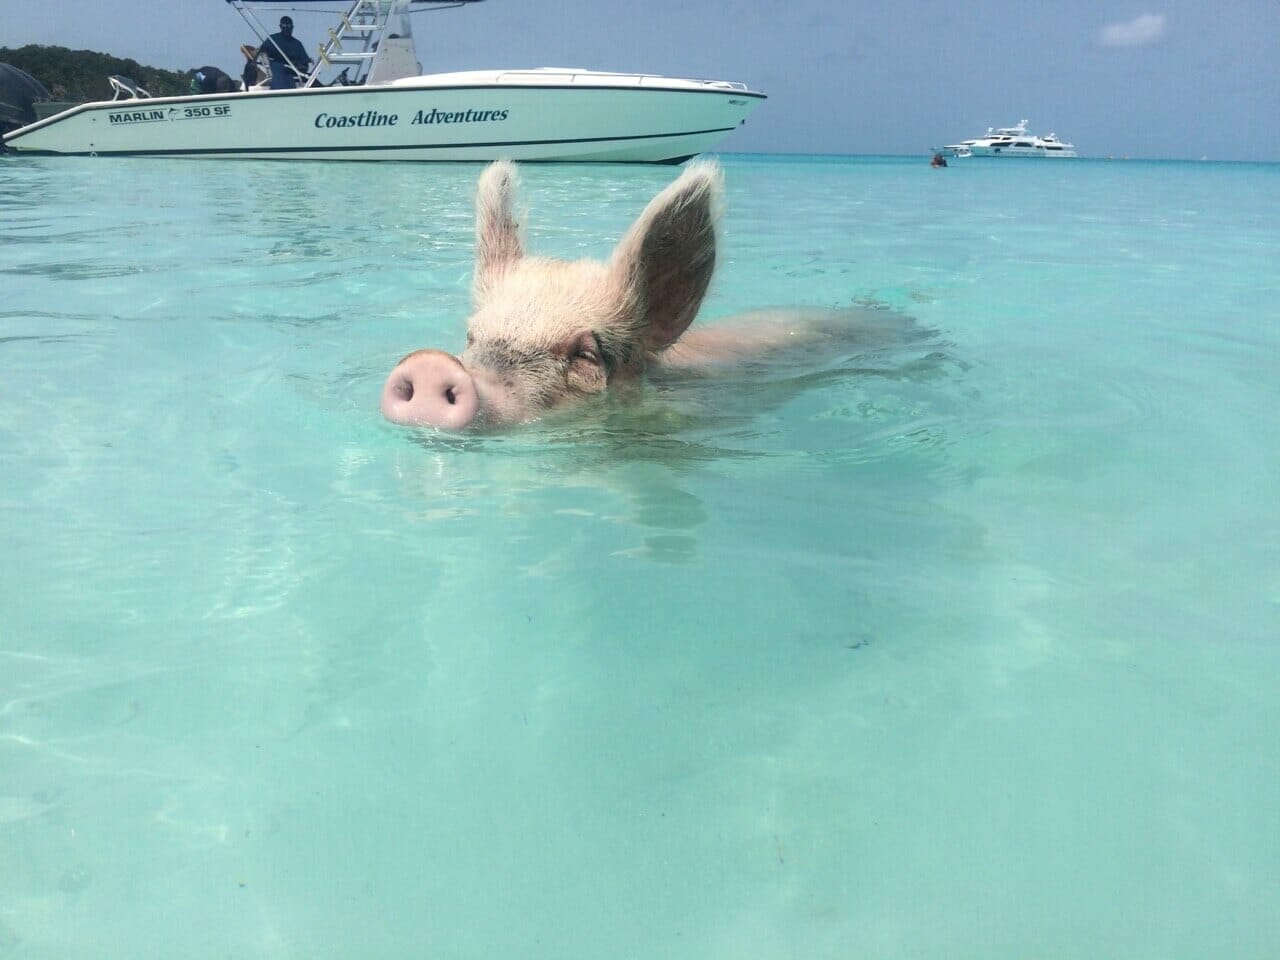 A pig swimming in the crystalline waters of Big Major Cay, a small island in Exumas, Bahamas, and two boats sailing in the water.